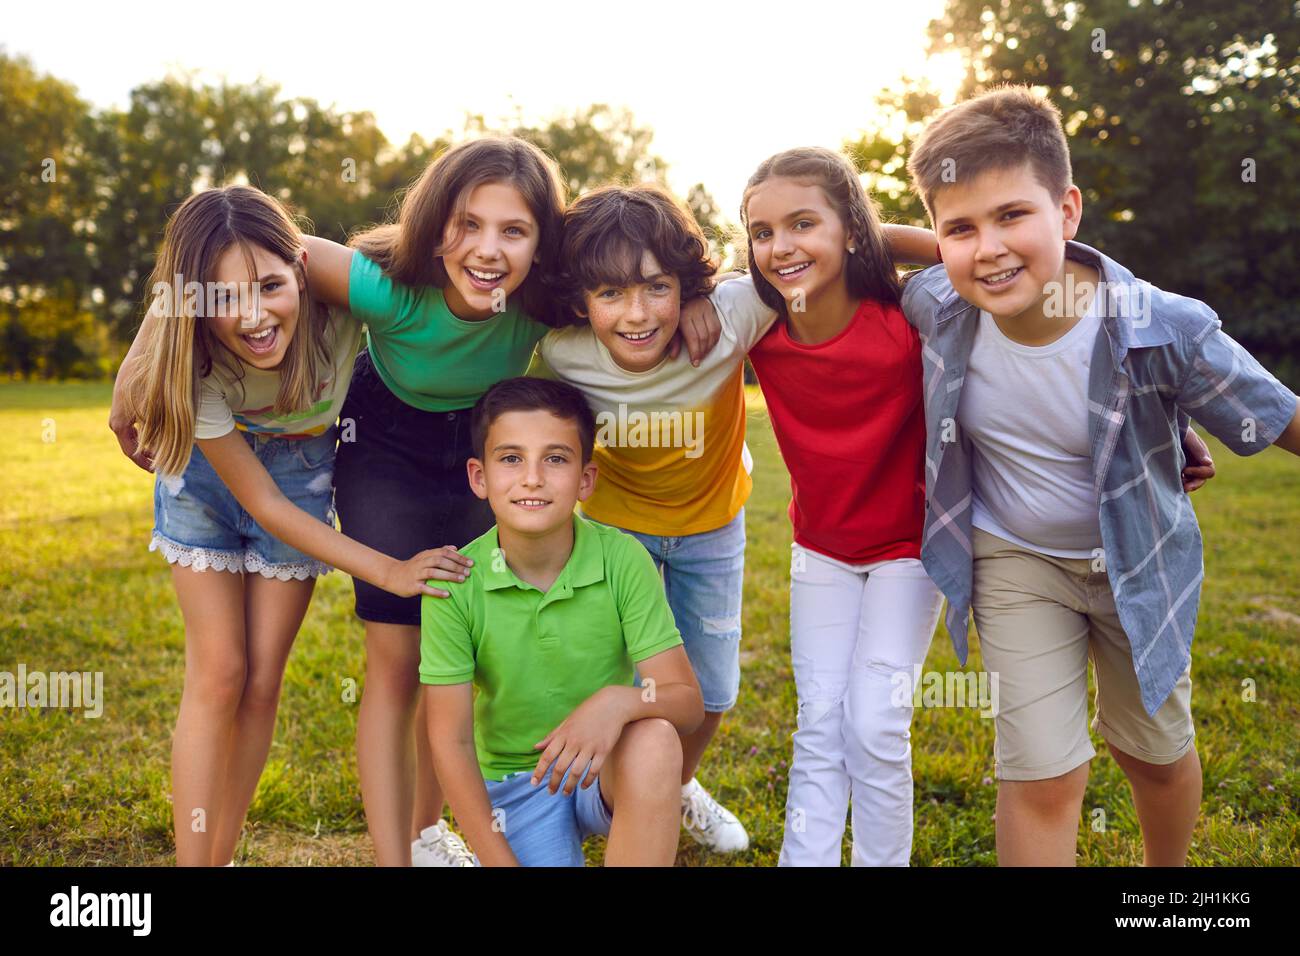 Bunch of cheerful little friends hugging and posing for a group photo in the park Stock Photo